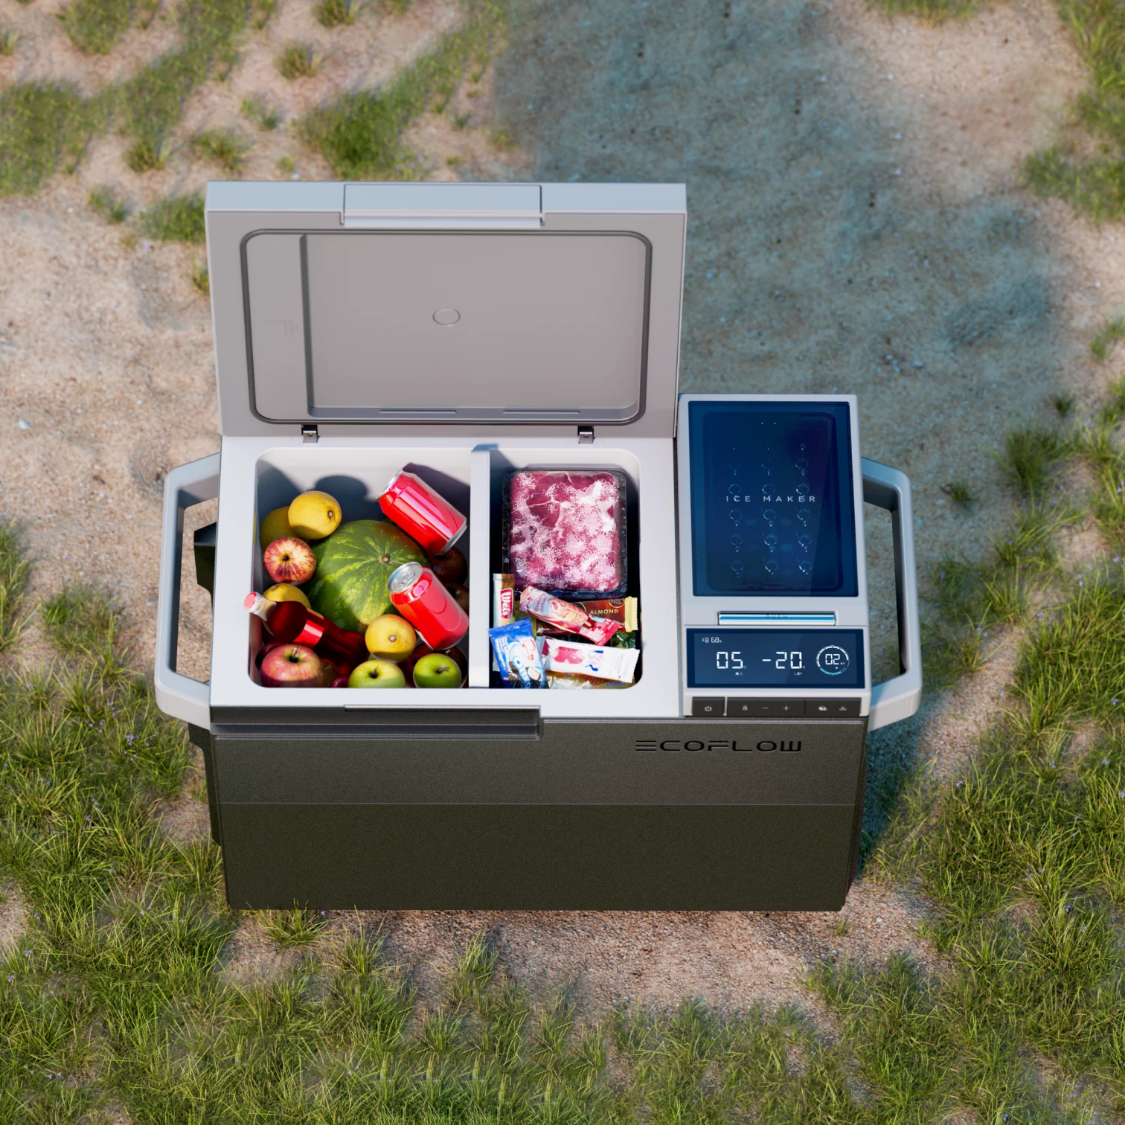 EcoFlow Glacier World's first 3-in-1 portable fridge, freezer, and ice maker